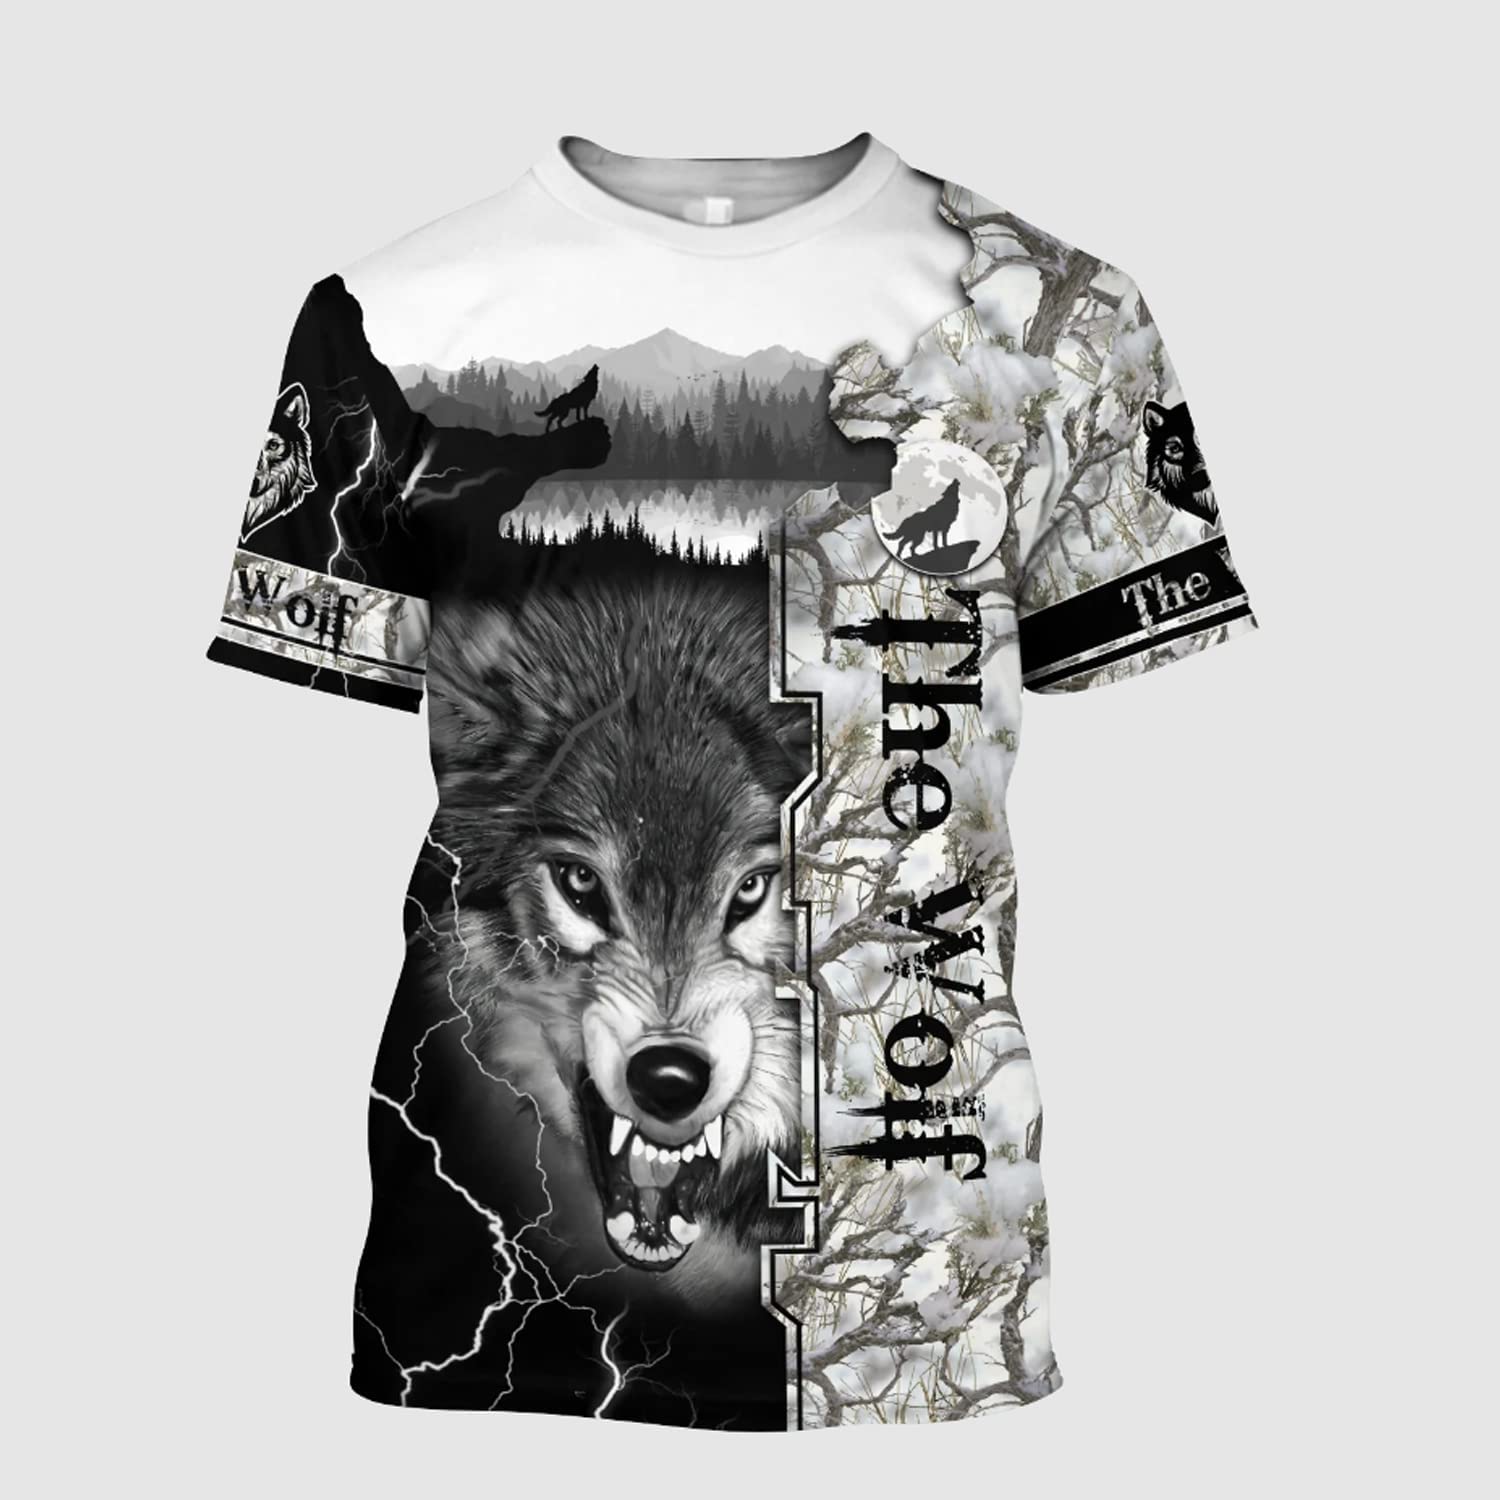 All Over Print Wolf 3D Hoodie: Perfect Gift for Wolf Lovers, Hunters, and Families During Winter Season, Available in Pullover Hoodie, Hawaiian Shirt, and Sweatshirt Variants. – JOT1577